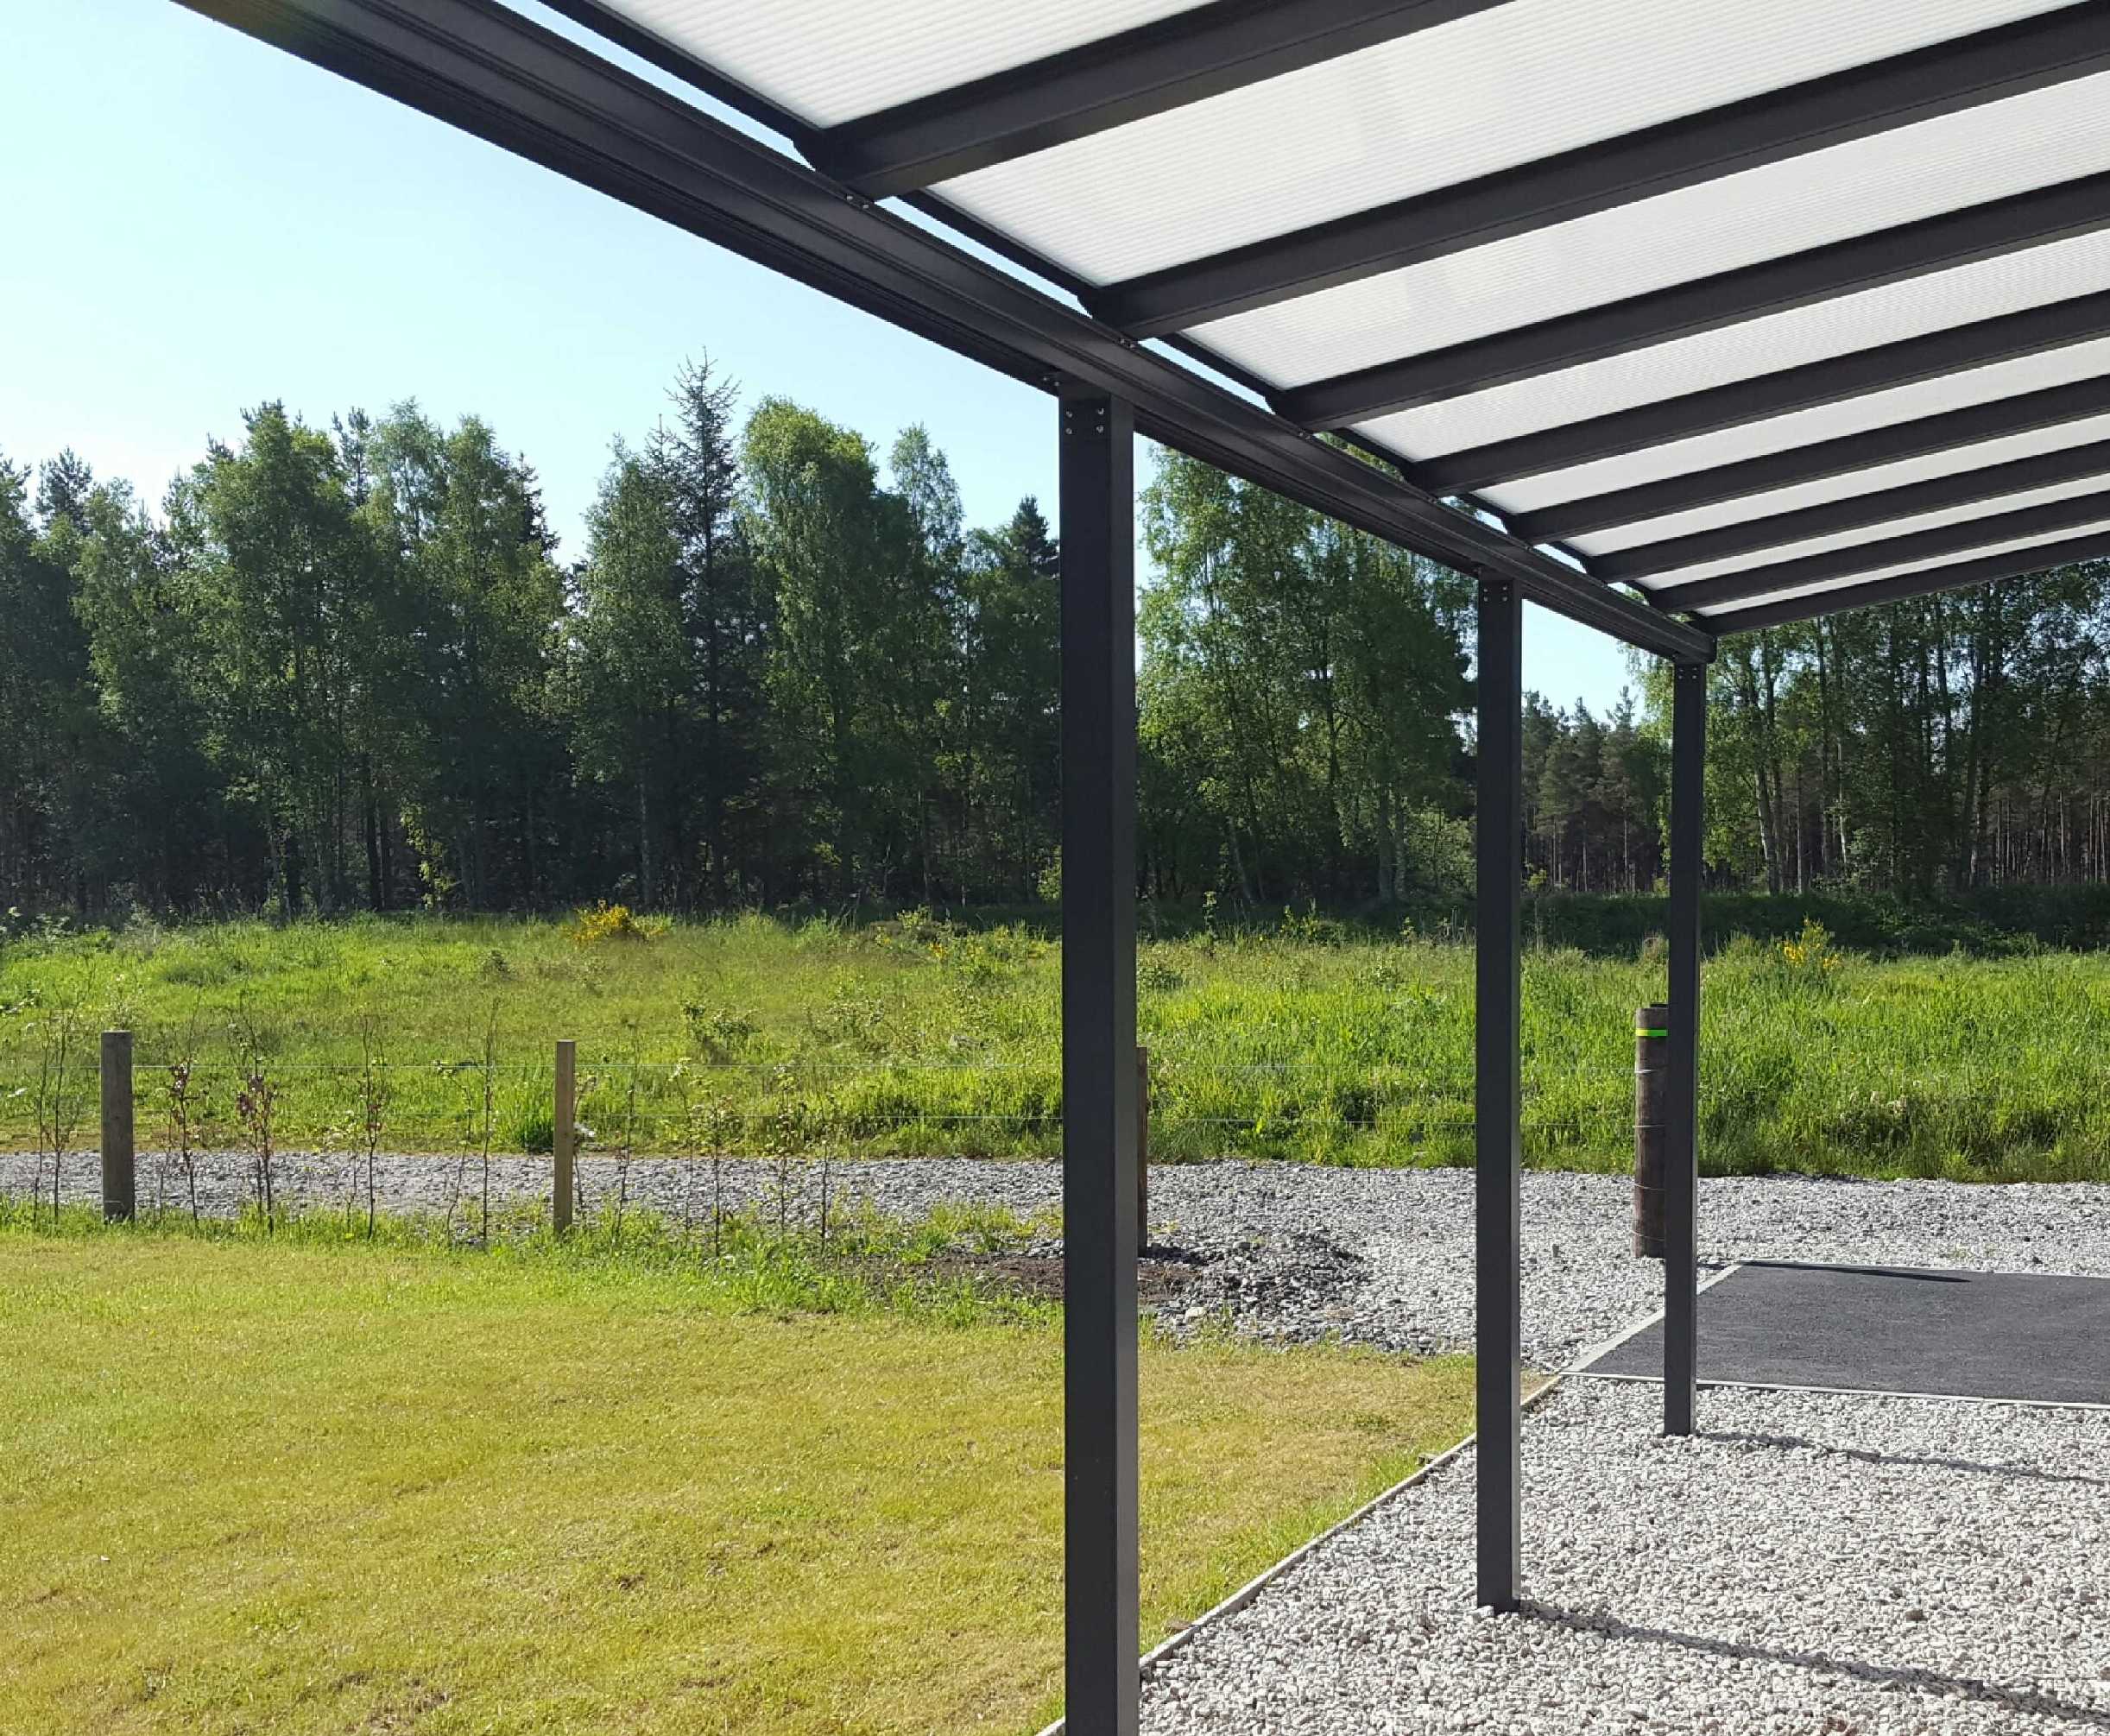 Omega Smart Lean-To Canopy, Anthracite Grey, UNGLAZED for 6mm Glazing - 8.4m (W) x 2.5m (P), (4) Supporting Posts